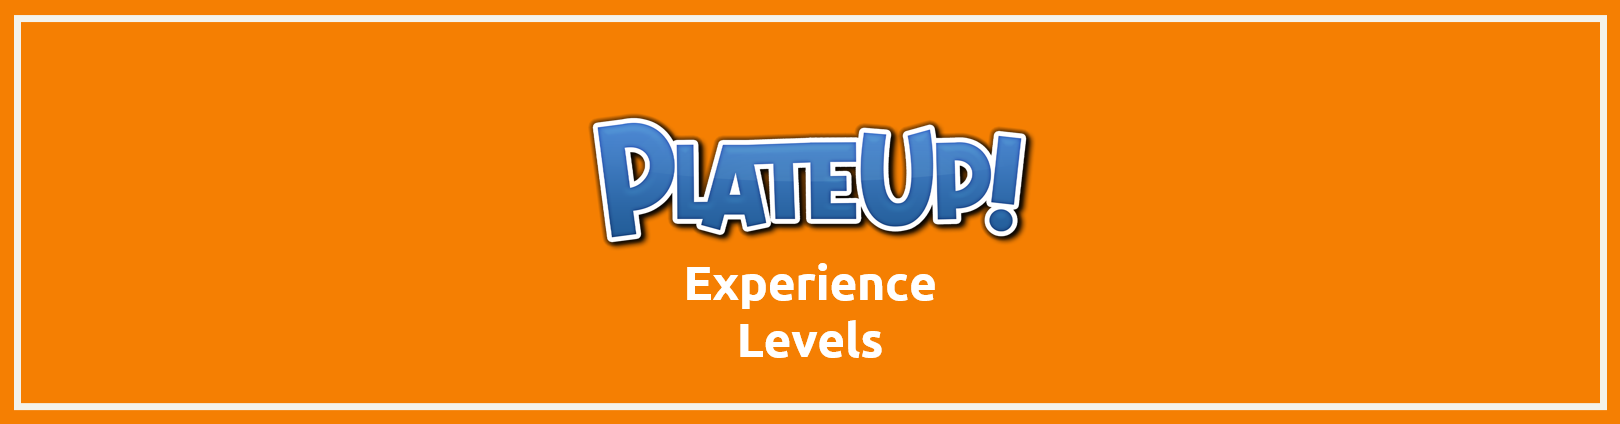 PlateUp! Levels and Rewards Guide - Level Guide - 7A78C5D